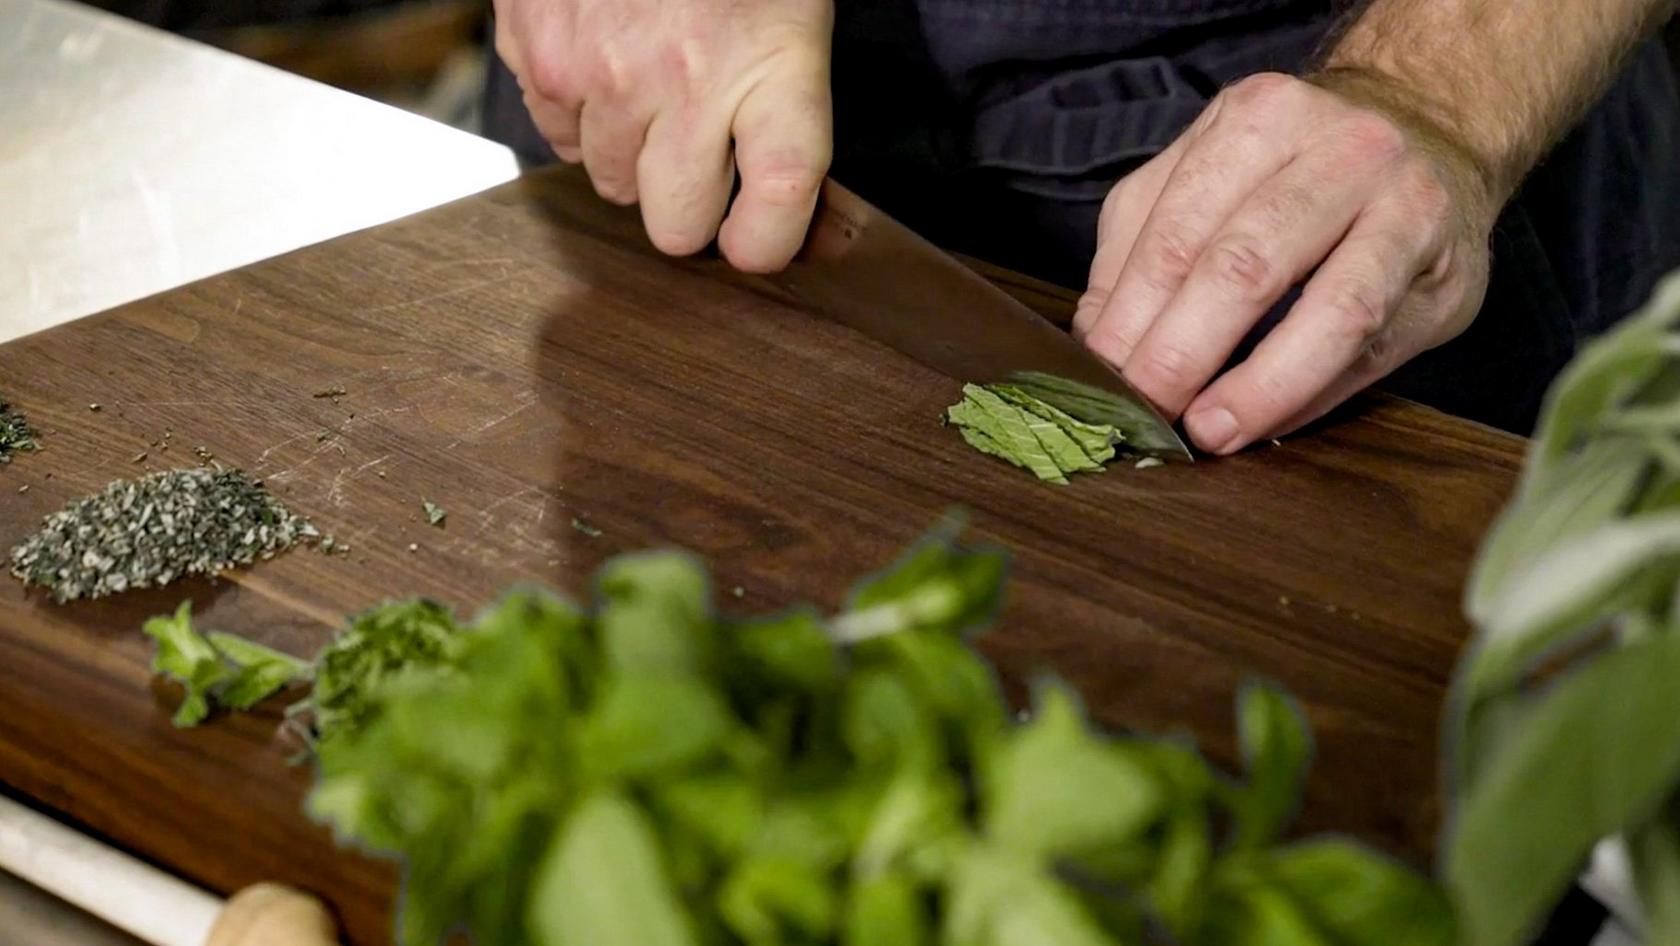 Knife_Skills_Prepping_Fresh_Herbs_Like_a_Chef_with_Timothy_Hollingsworth_001